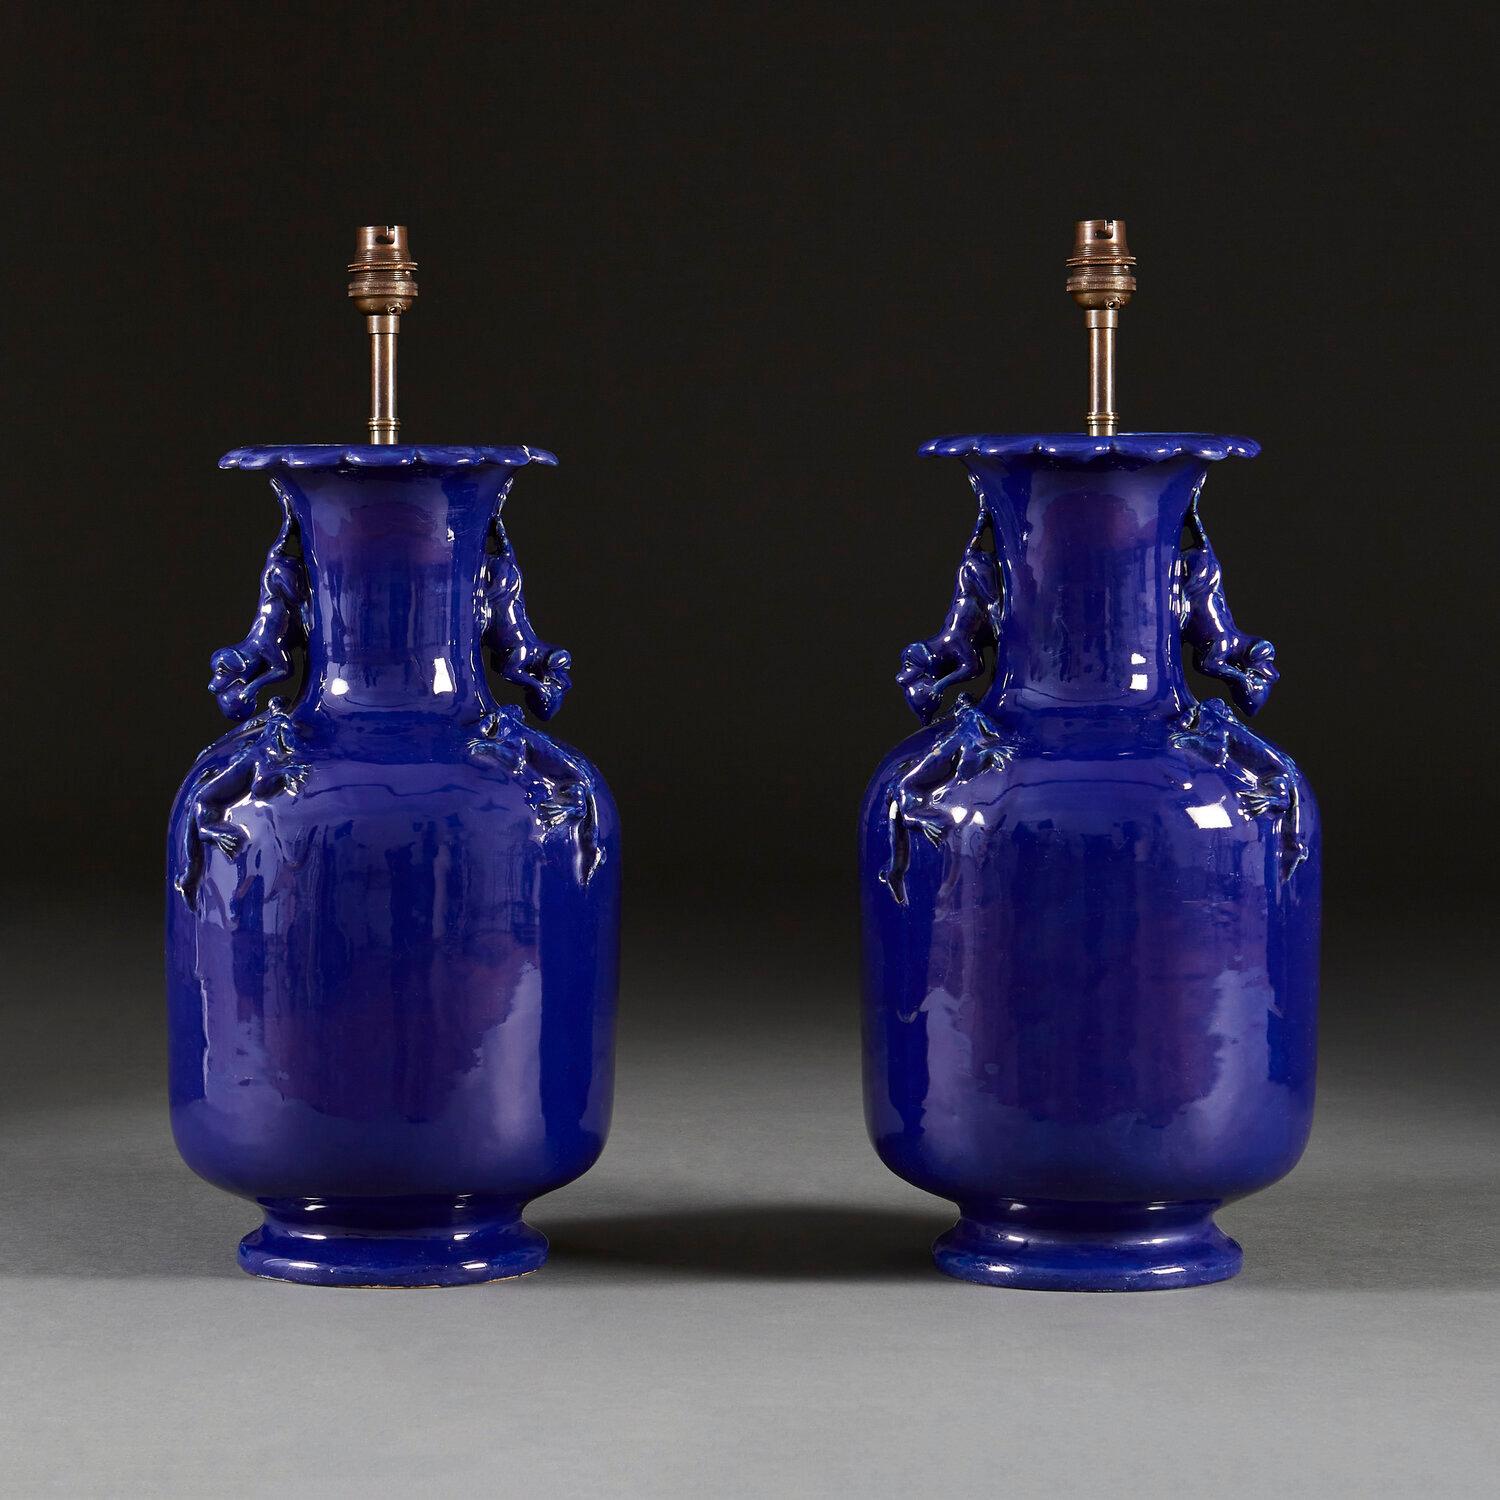 A pair of mid nineteenth century blue glaze vases with dragons to the necks, and handles to each side of the neck in the form of a dog. Now converted as lamps.

Please note that the lampshade is not included, and that the lamps are currently wired